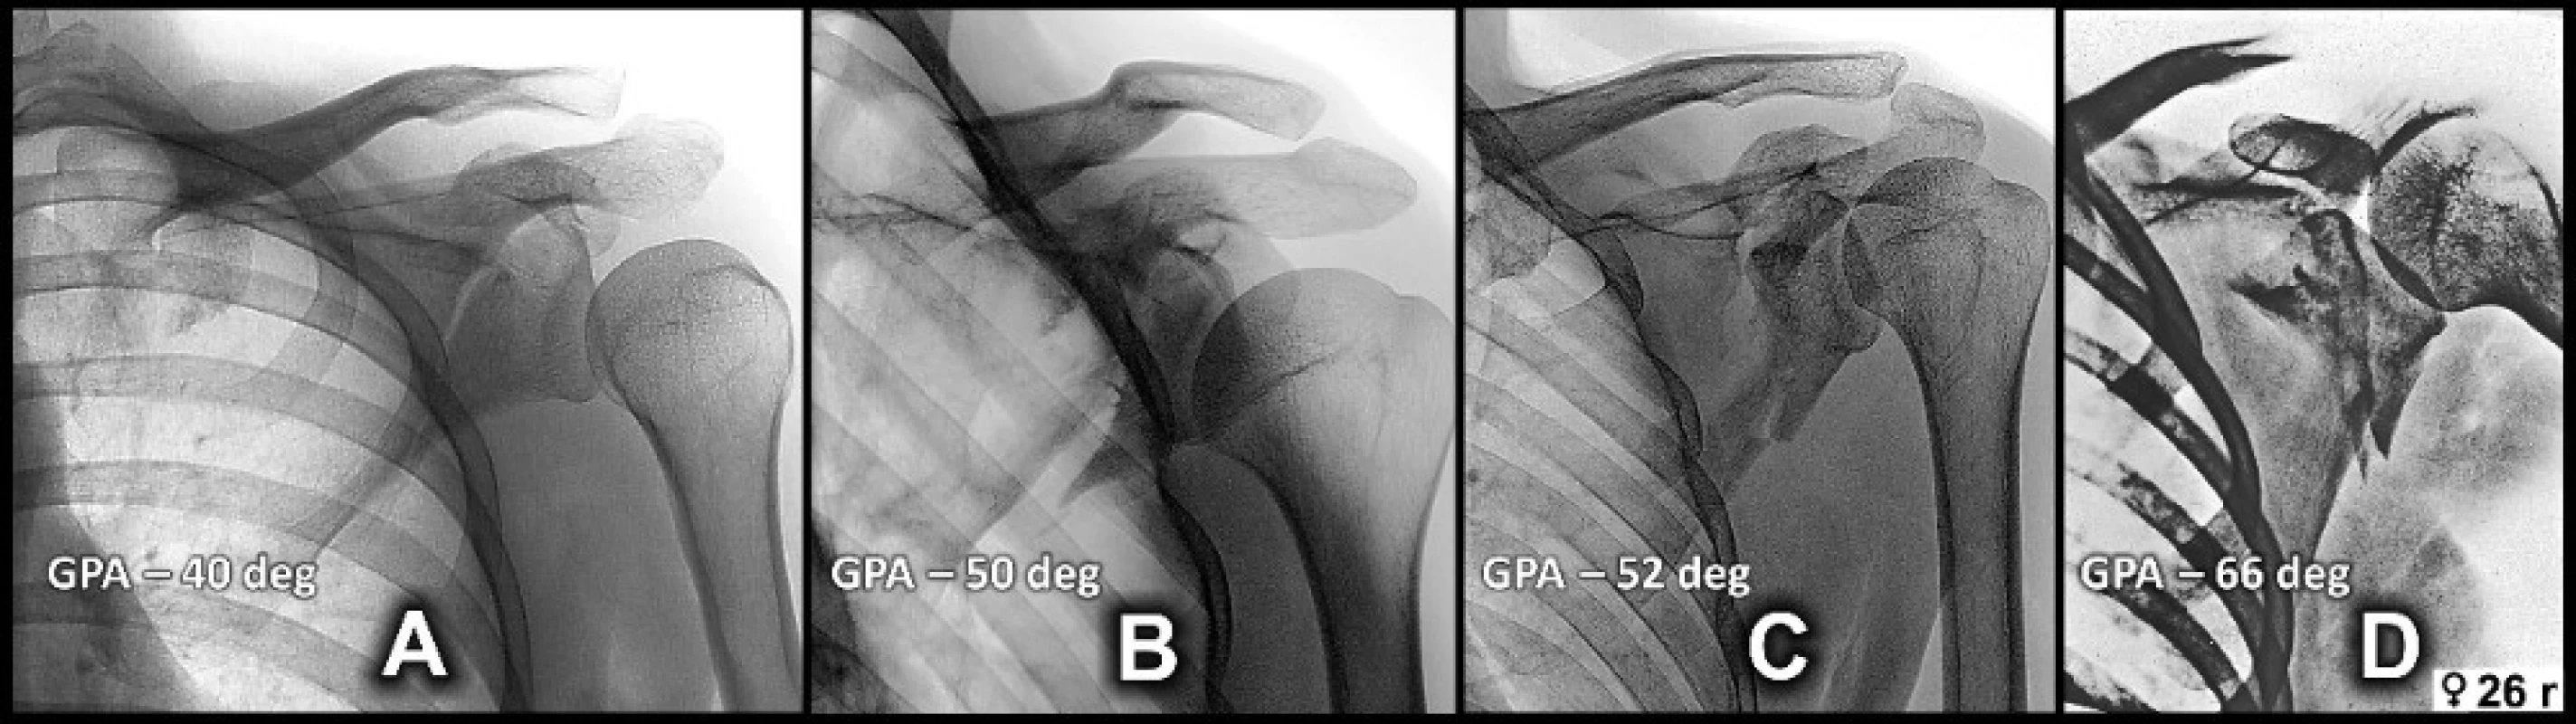 Comparison of the degree of displacement of the glenoid fragment, showing an increasing valgosity and widening
of a gap between the coracoid and the glenoid fragment. A – case 2; B – case 3; C – case 4, D – case 1